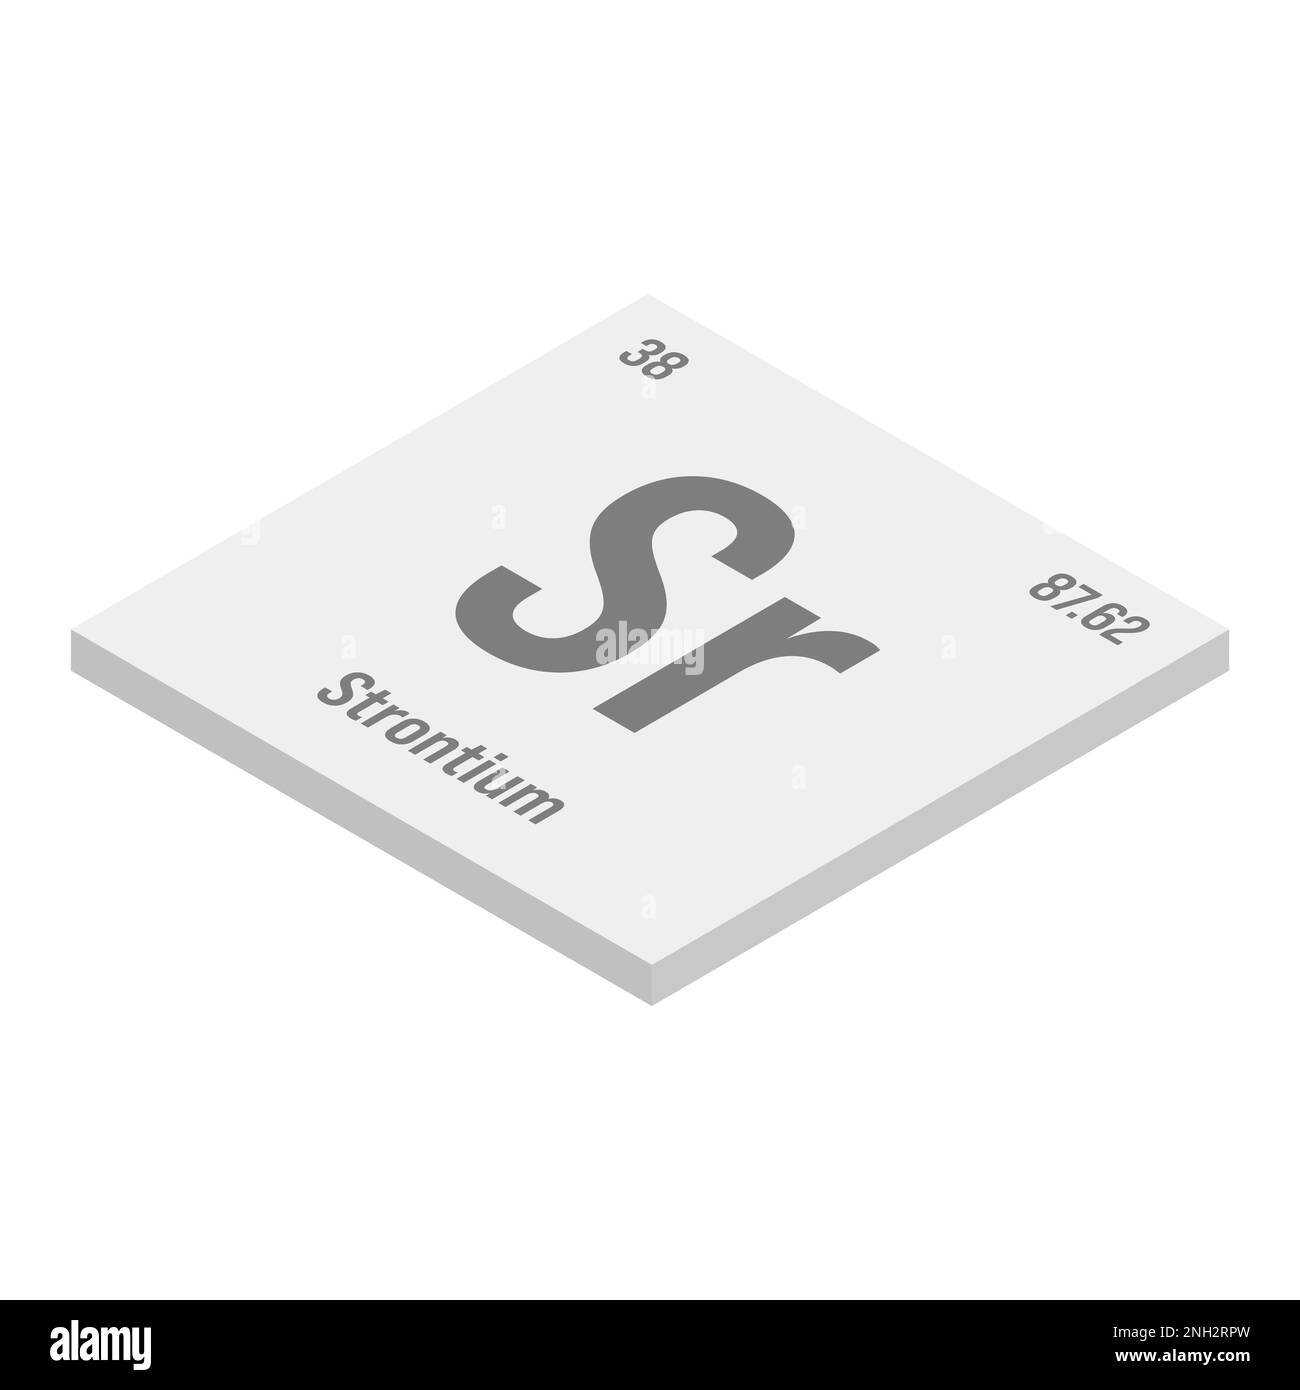 Strontium, Sr, gray 3D isometric illustration of periodic table element with name, symbol, atomic number and weight. Alkaline earth metal with various industrial uses, such as in certain types of glass, fireworks, and as a medication for certain medical conditions. Stock Vector